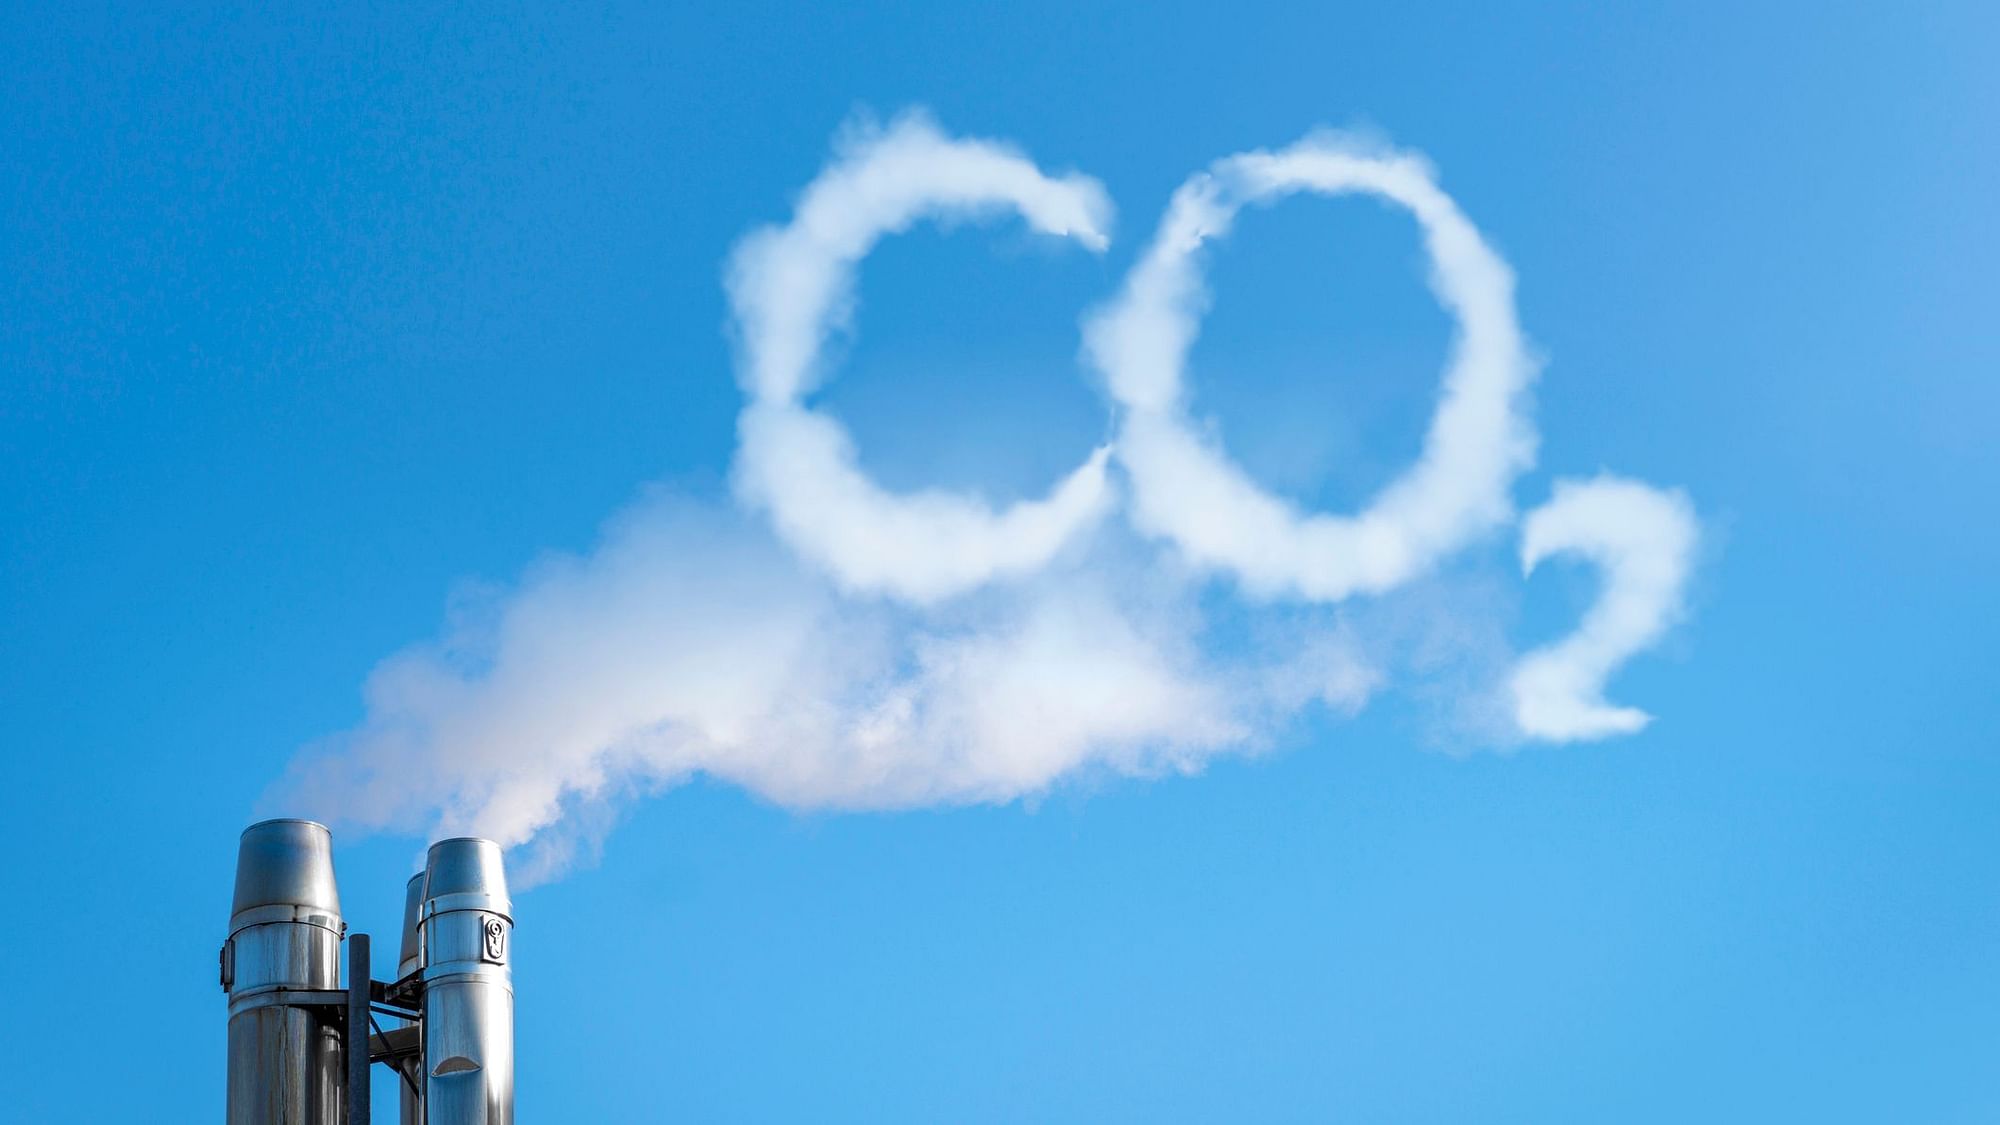 Israeli scientists develop bacteria which “eat” carbon dioxide.